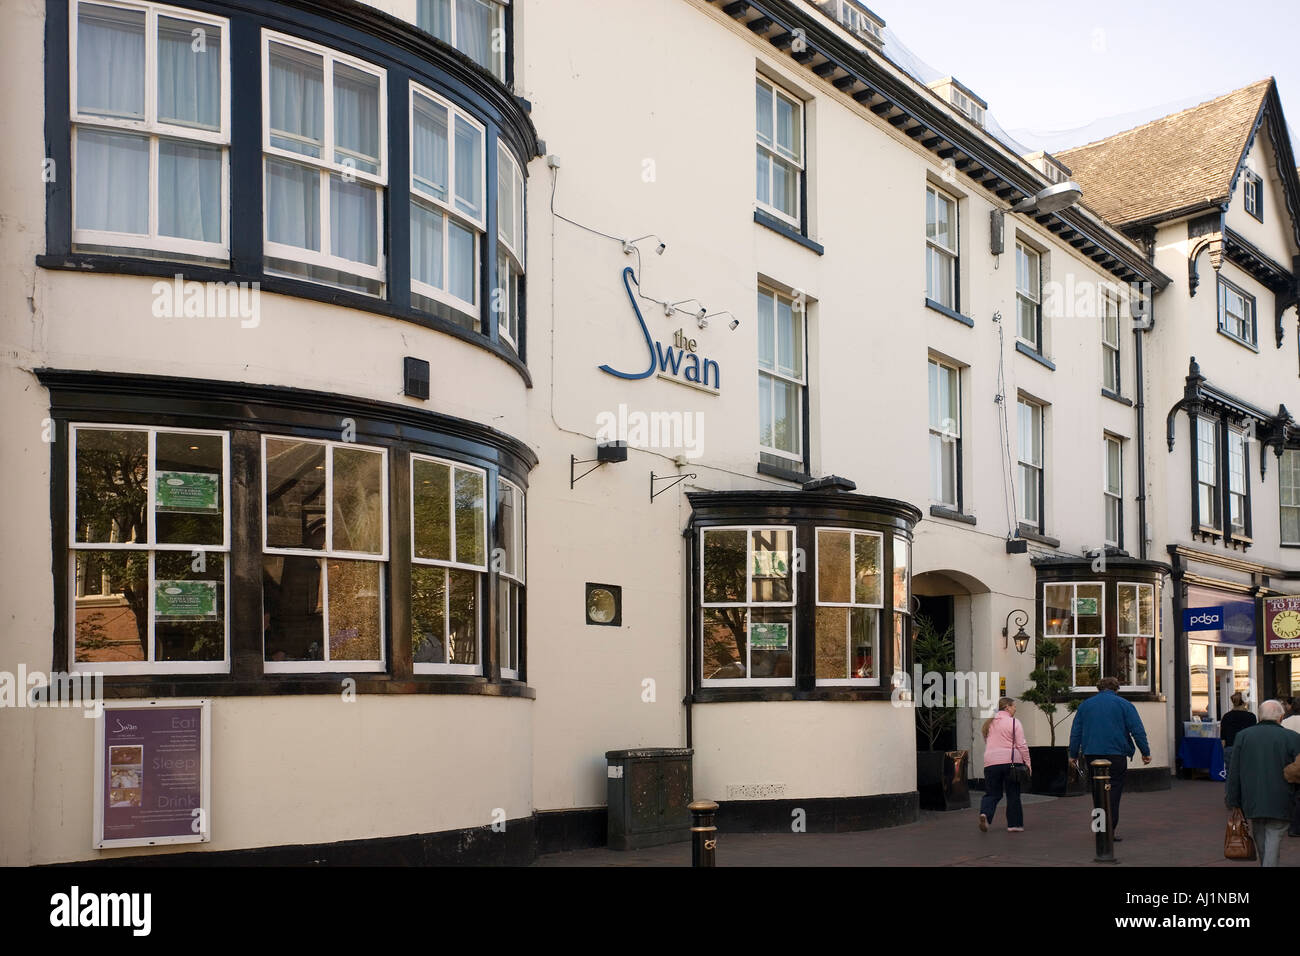 Le Swan Hotel, Stafford, Staffordshire, Angleterre Banque D'Images